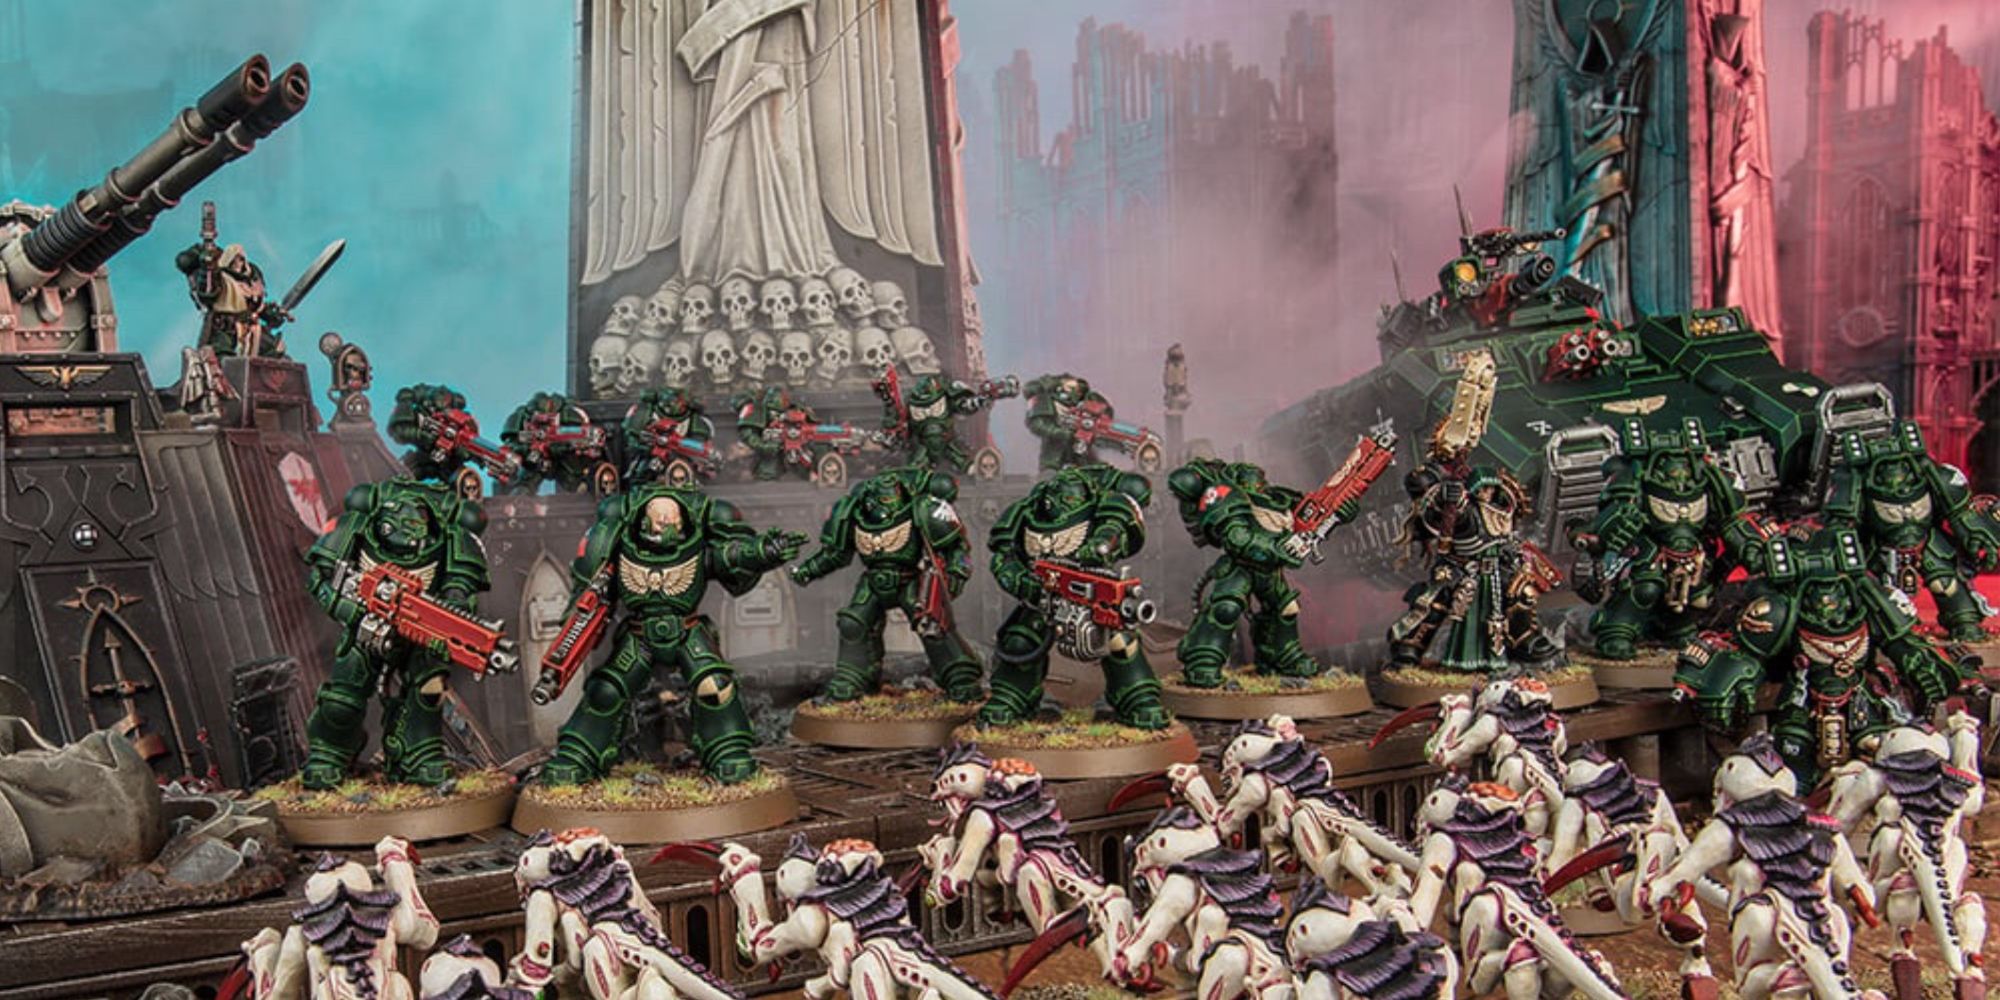 Warhammer 40k: 7 Reasons To Play Space Marines An army of Dark Angels Models vs a swarm of Tyranids models by games workshop